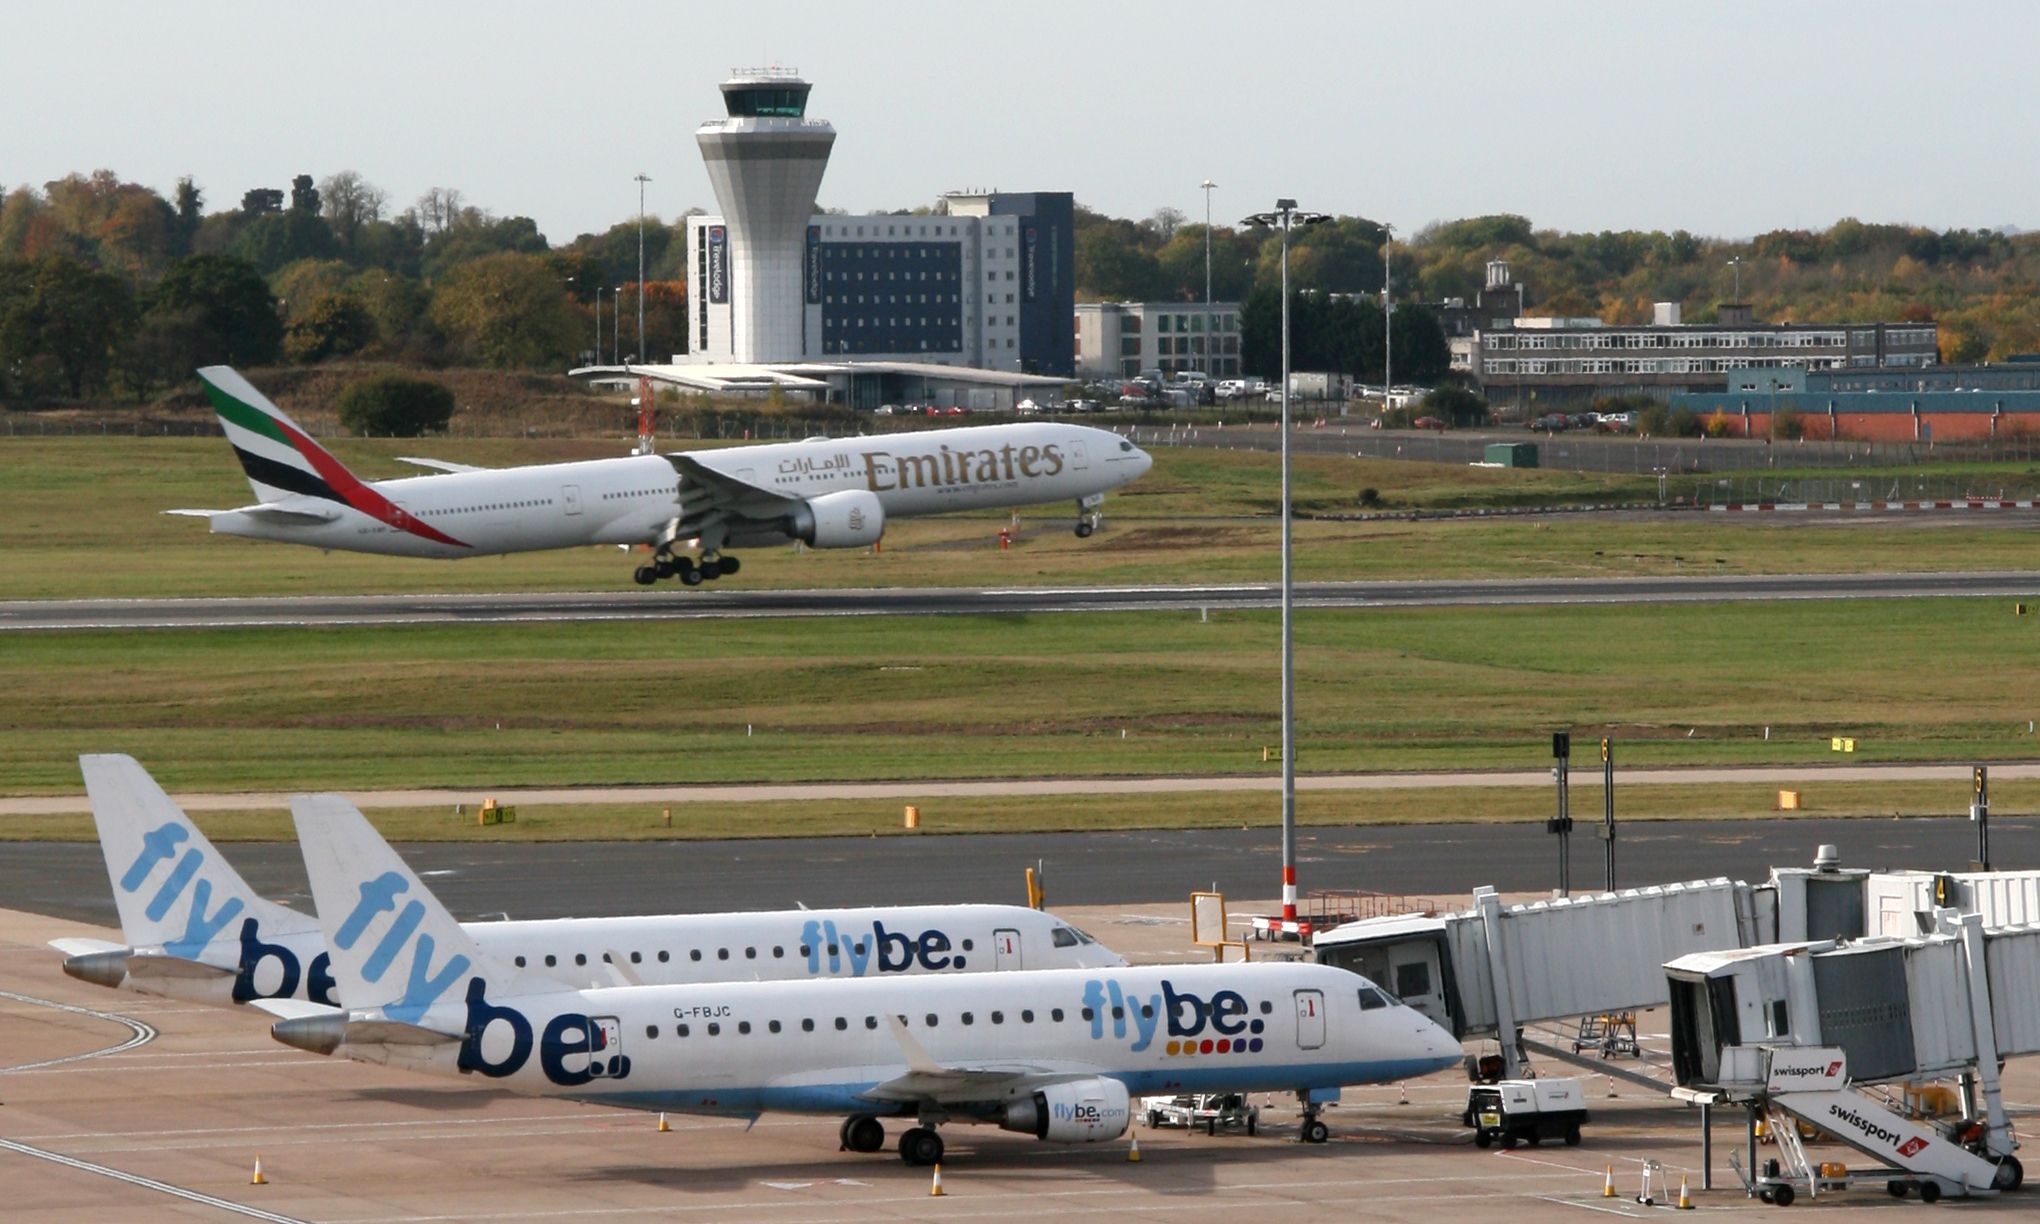 Birmingham-Airport-Tower-Emirates-and-Flybe